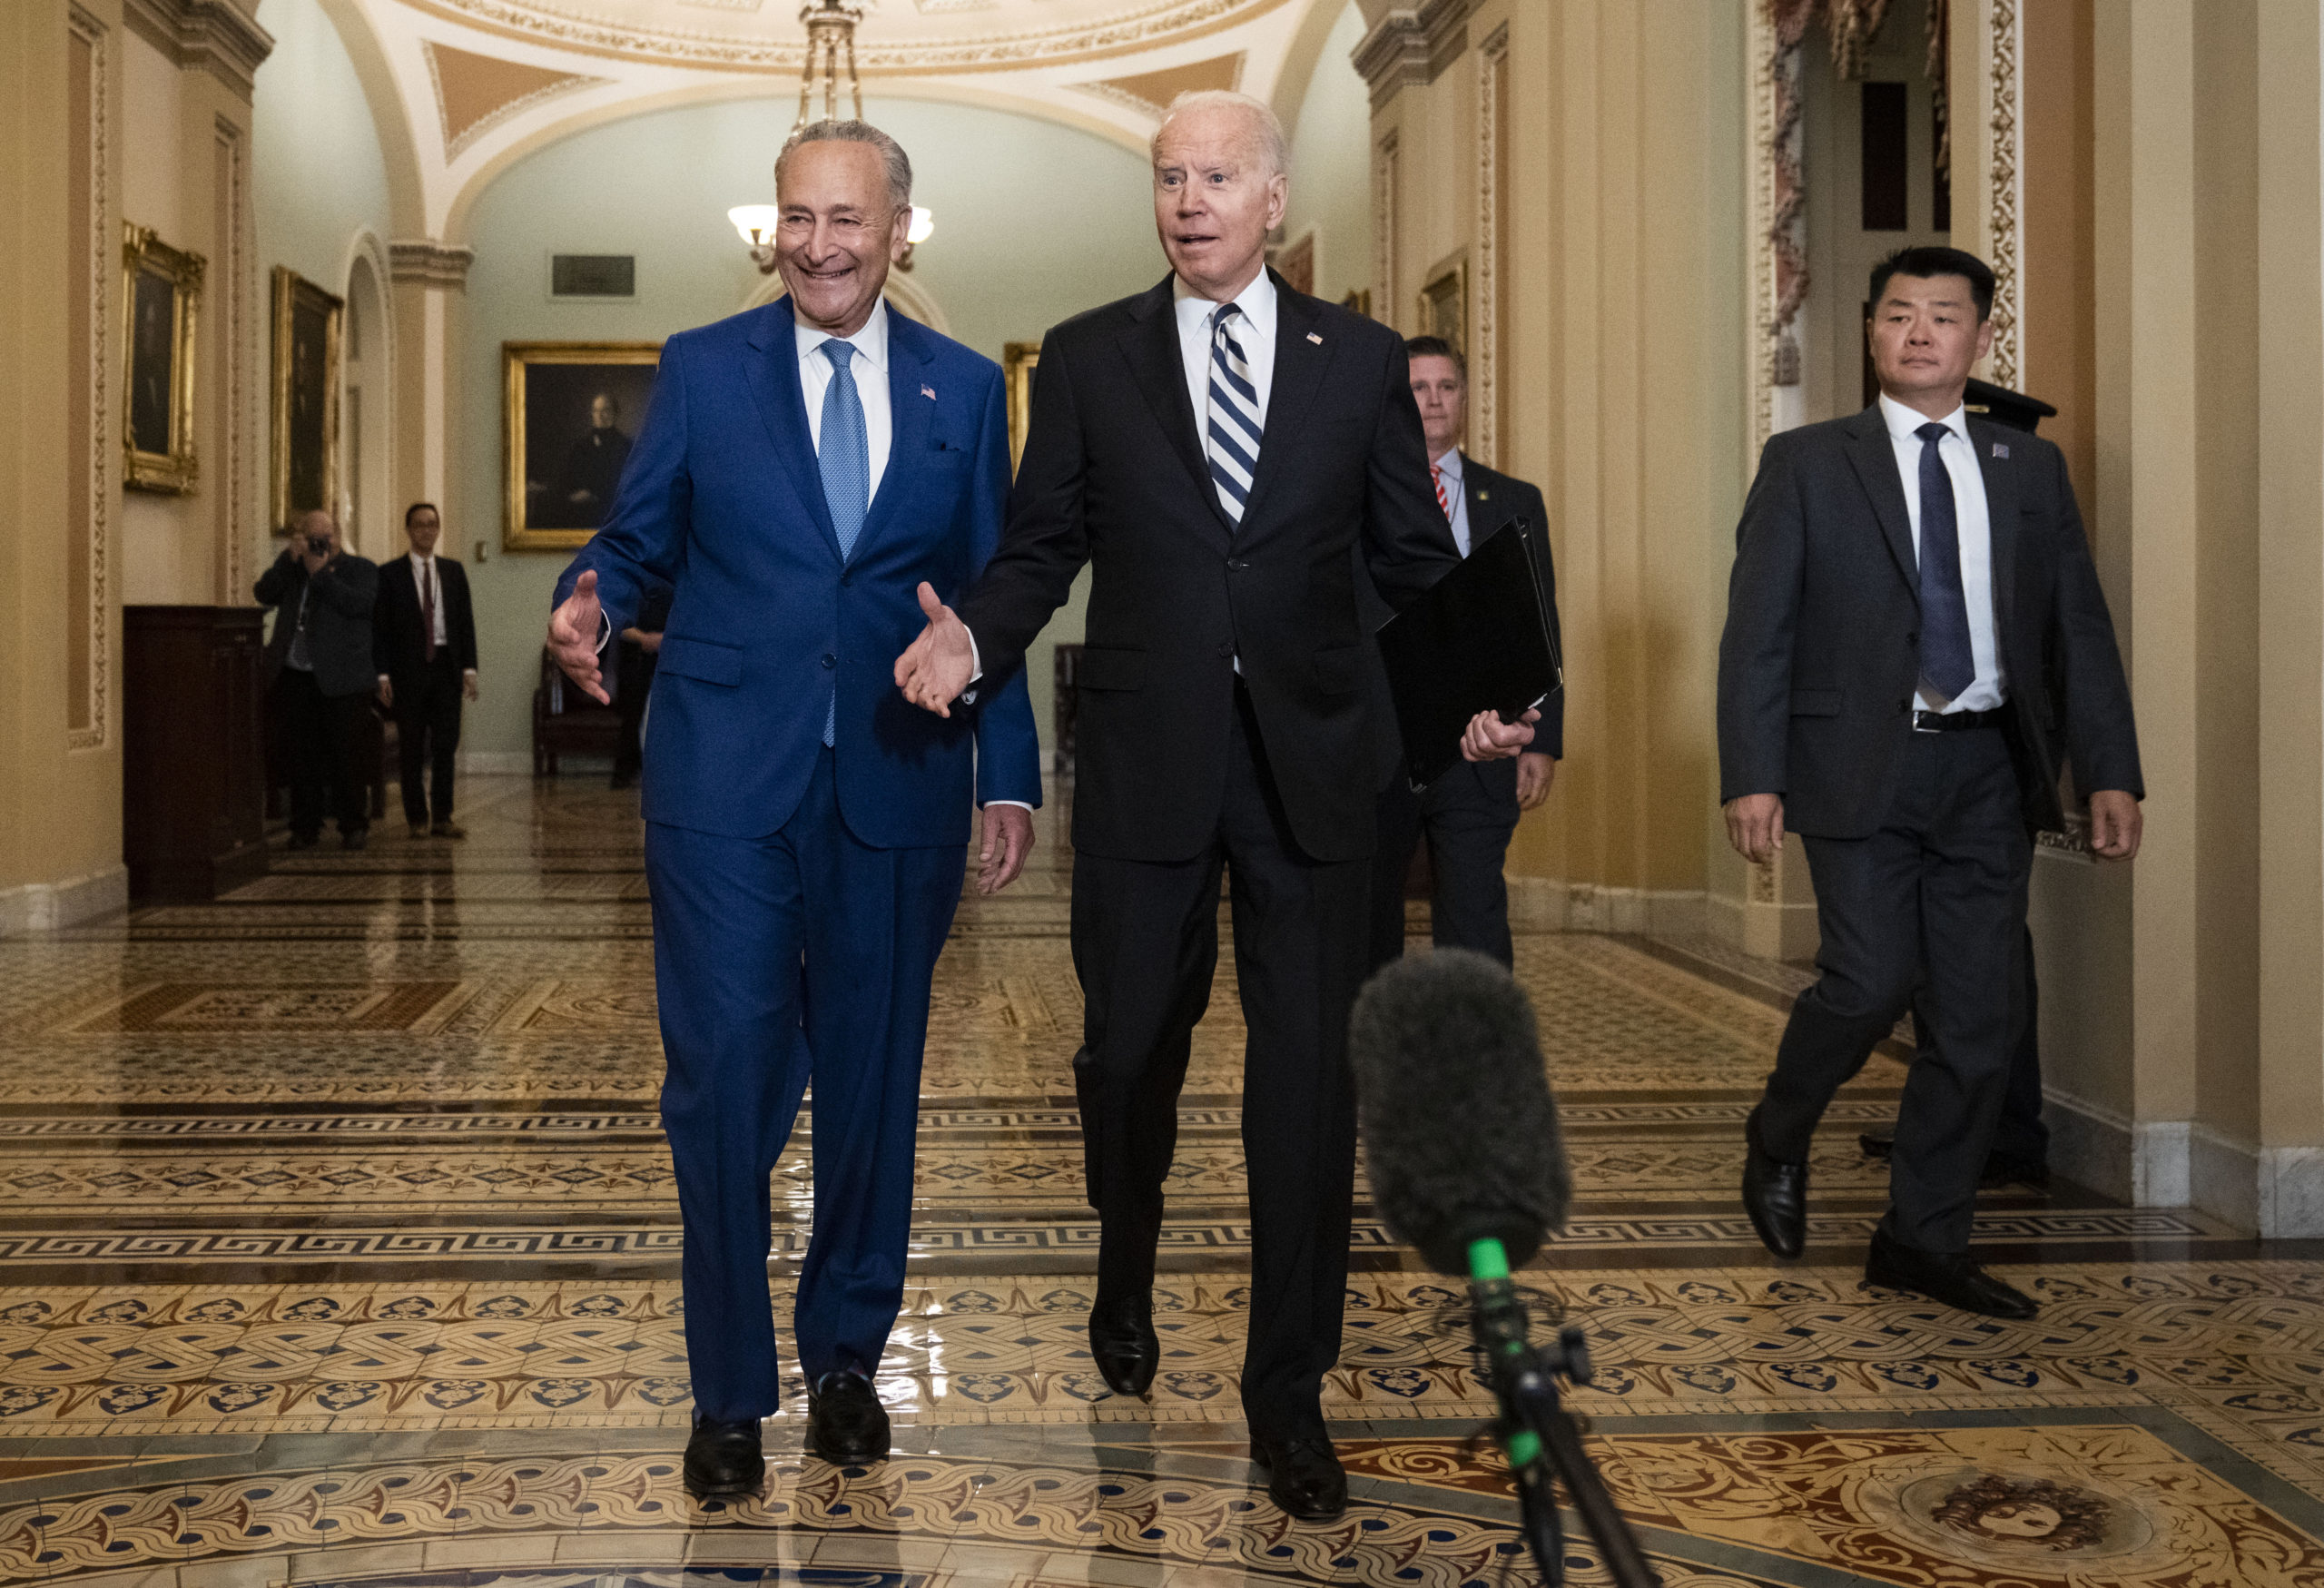 WASHINGTON, DC - JULY 14: (EDITOR'S NOTE: Alternate crop) Senate Majority Leader Chuck Schumer (D-NY) and U.S. President Joe Biden speak briefly to reporters as they arrive at the U.S. Capitol for a Senate Democratic luncheon July 14, 2021 in Washington, DC. President Biden is on the Hill to discuss with Senate Democrats the $3.5 trillion reconciliation package they have reached overnight that would expand Medicare benefits, boost federal safety net programs and combat climate change. (Photo by Drew Angerer/Getty Images)